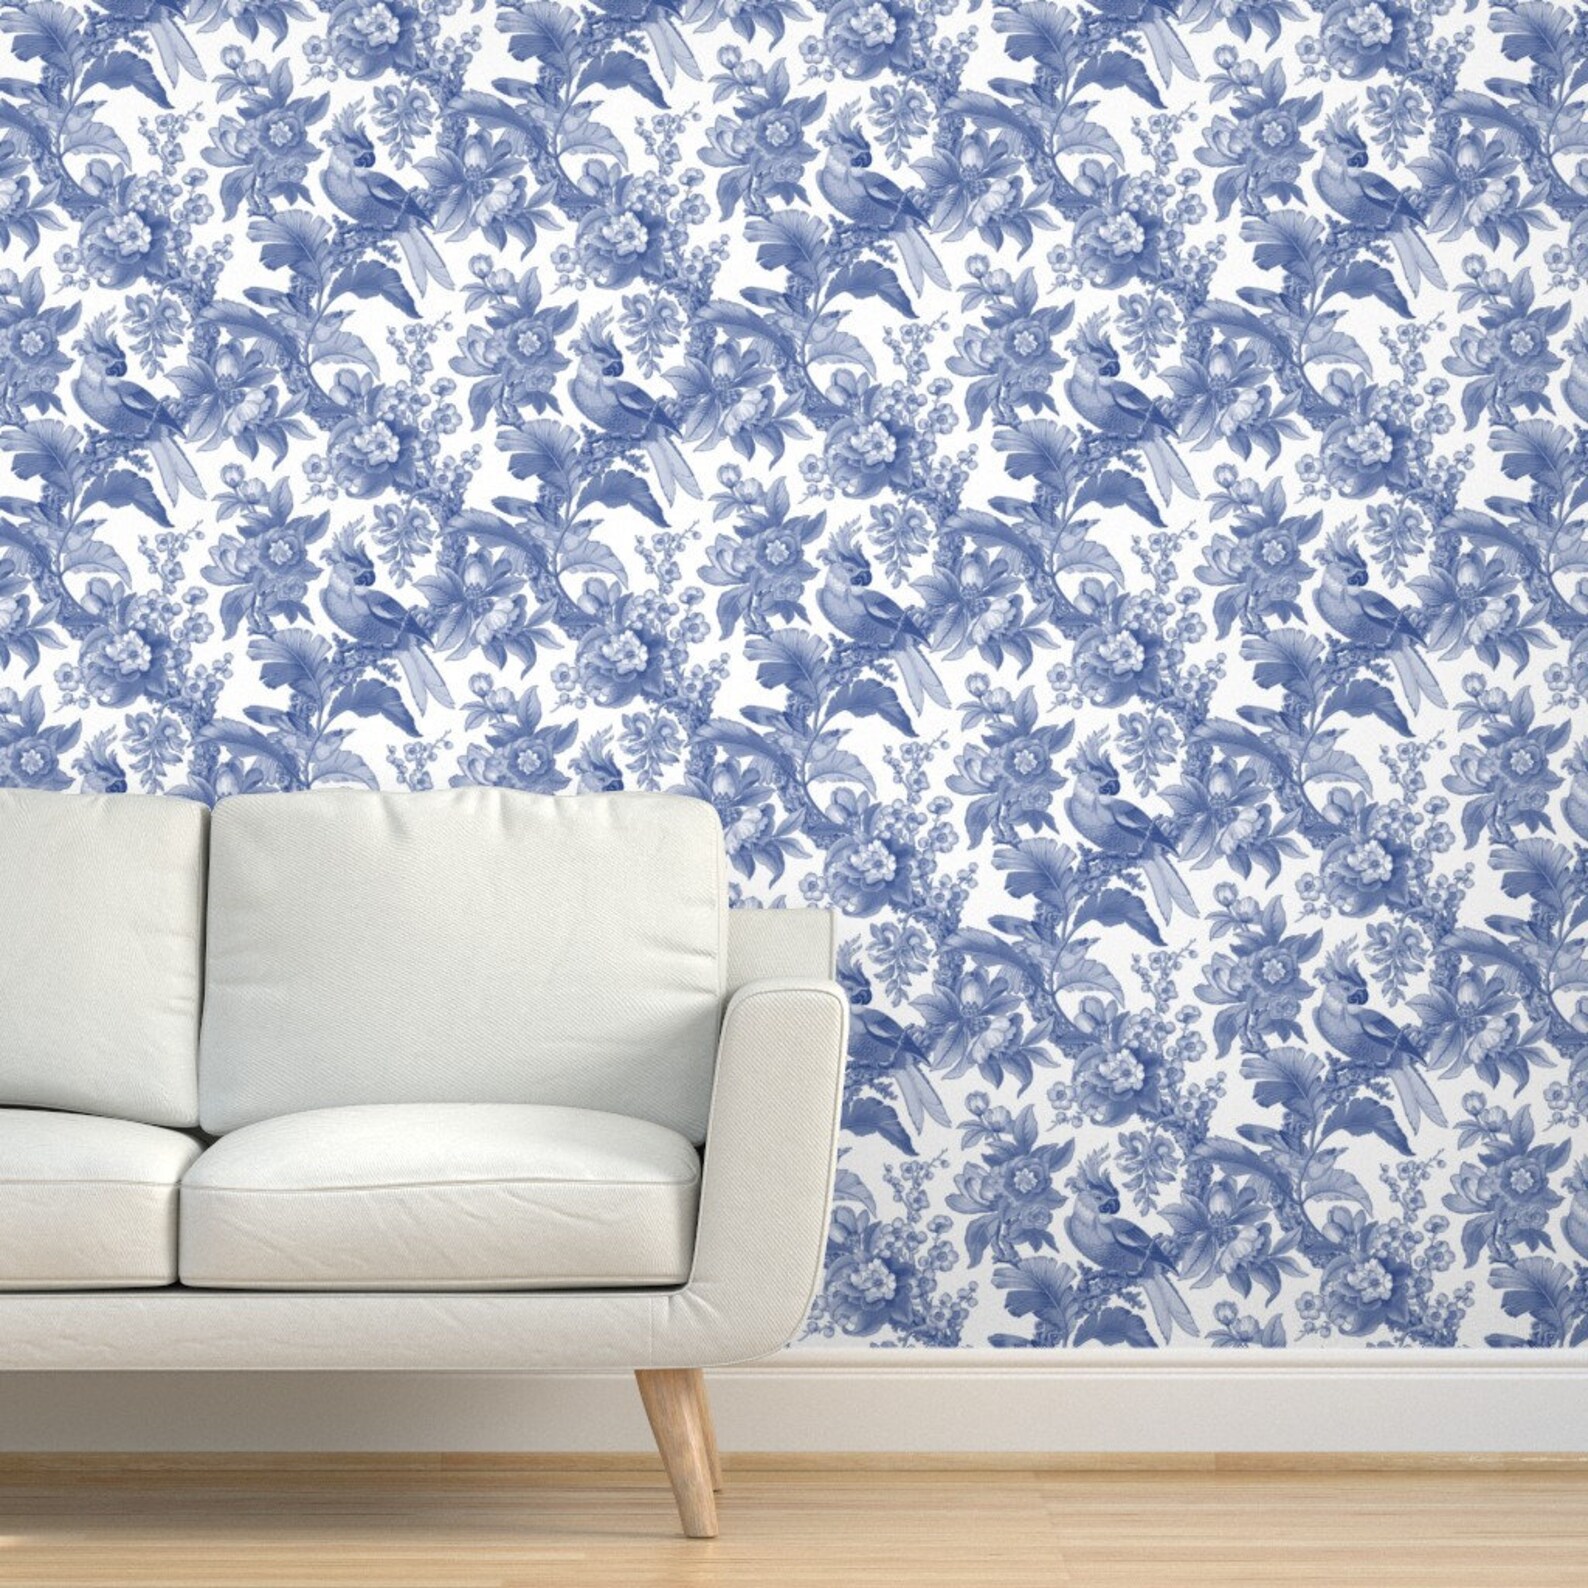 Chinoiserie Wallpaper Edwardian Parrot by Peacoquettedesigns - Etsy